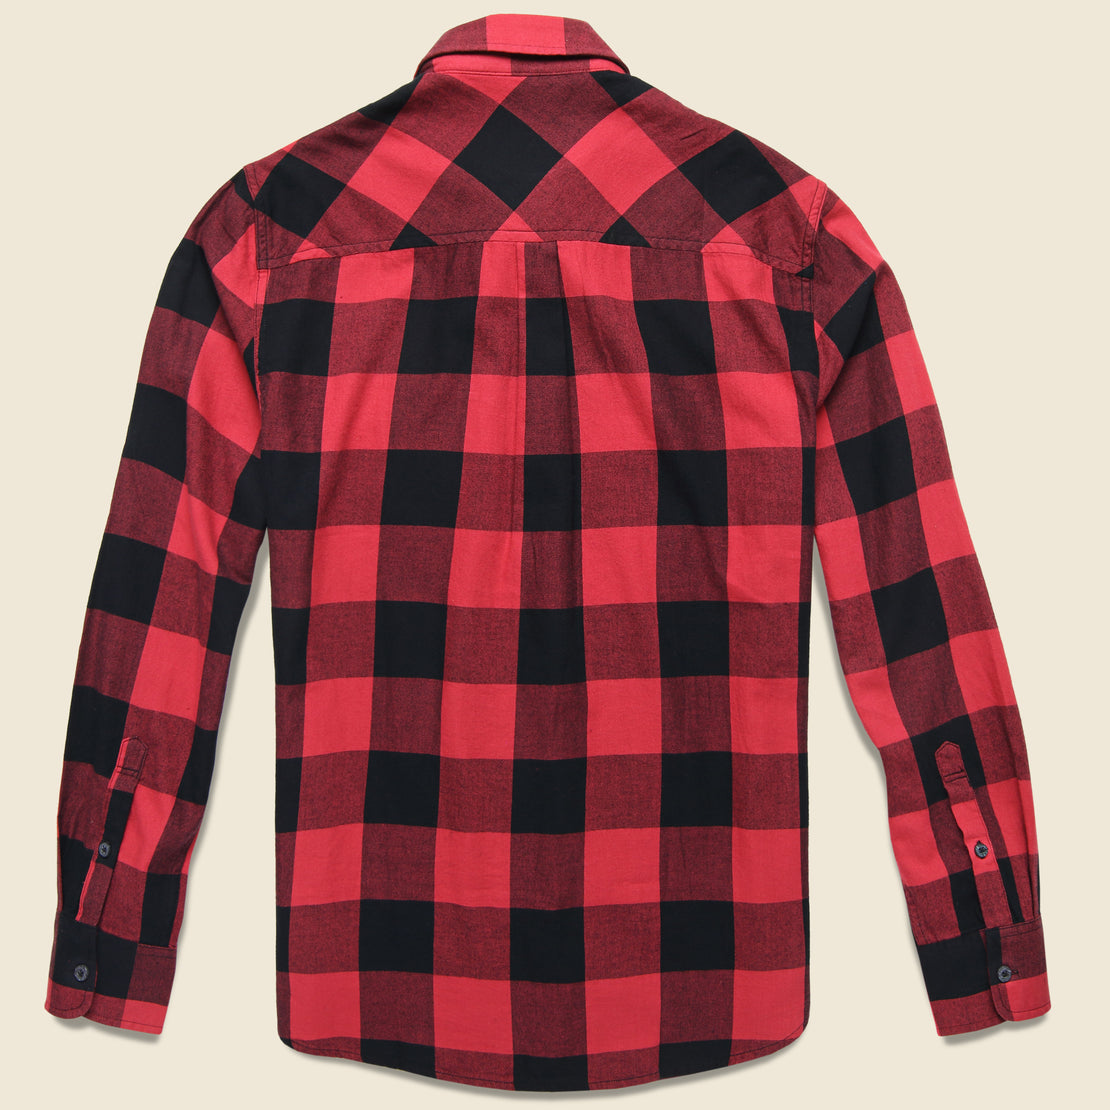 Foster Flannel - Red - Penfield - STAG Provisions - Tops - L/S Woven - Plaid